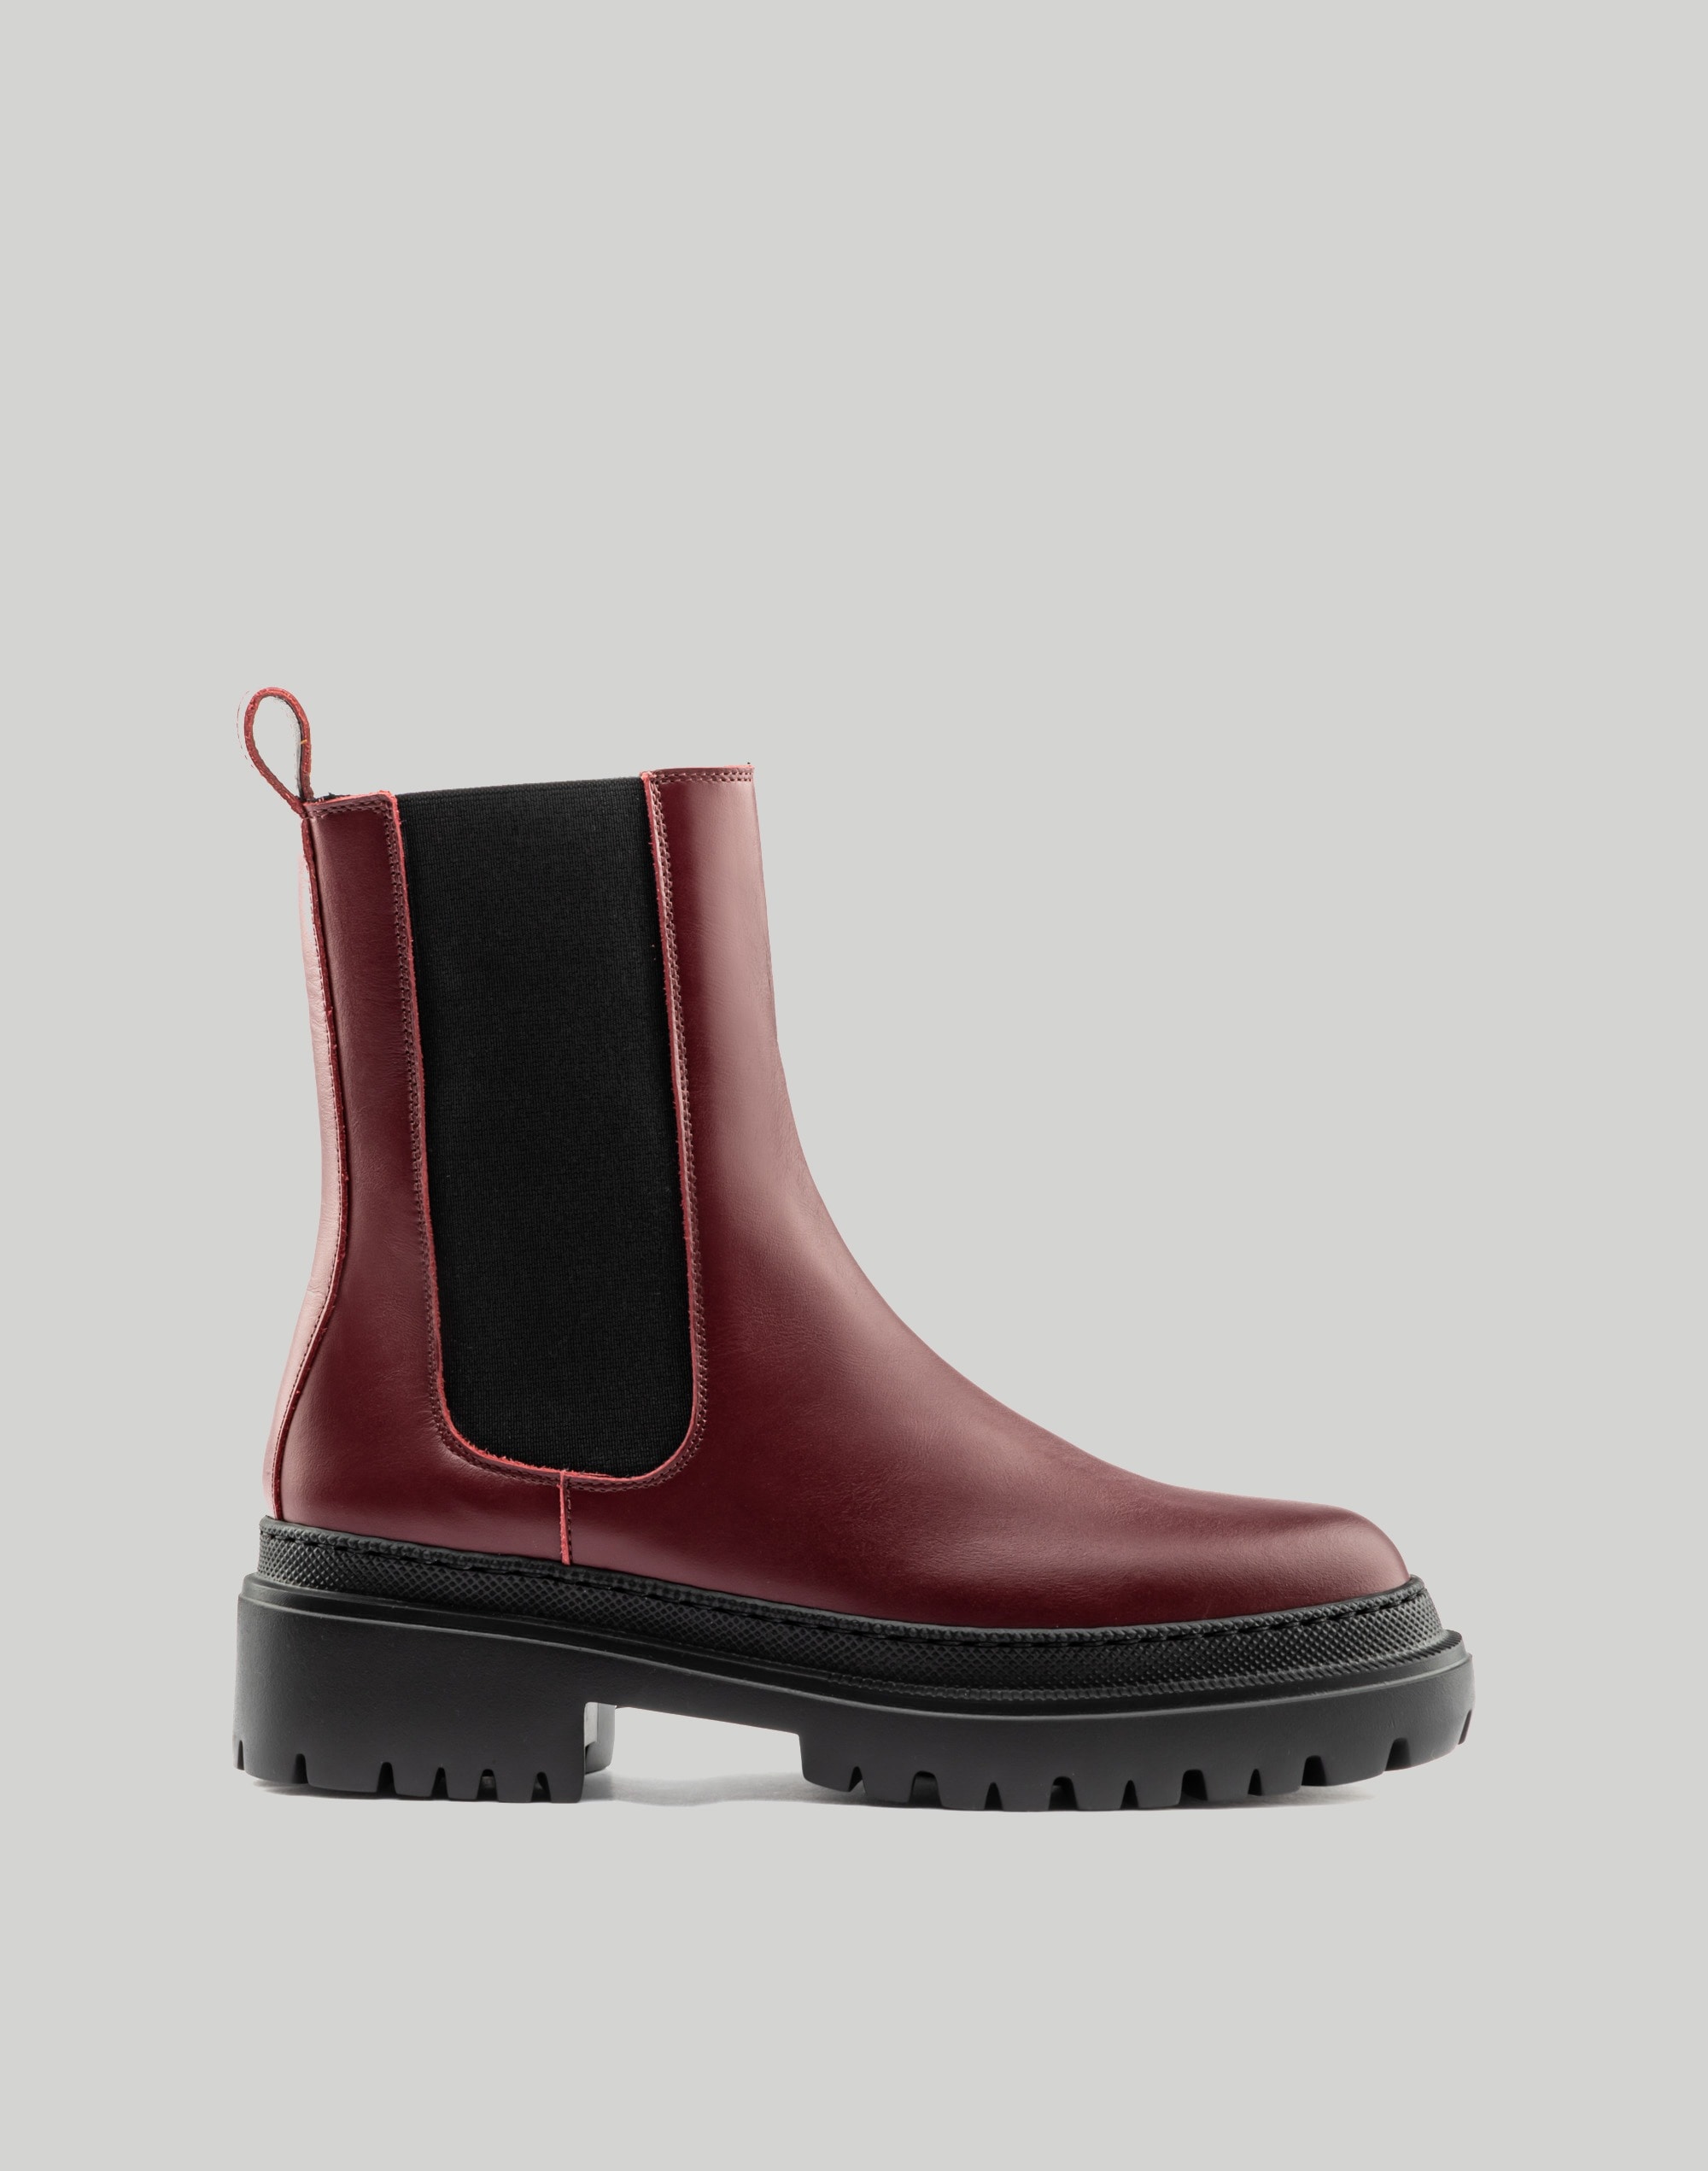 Maguire Cortina Oxblood Winter Boot